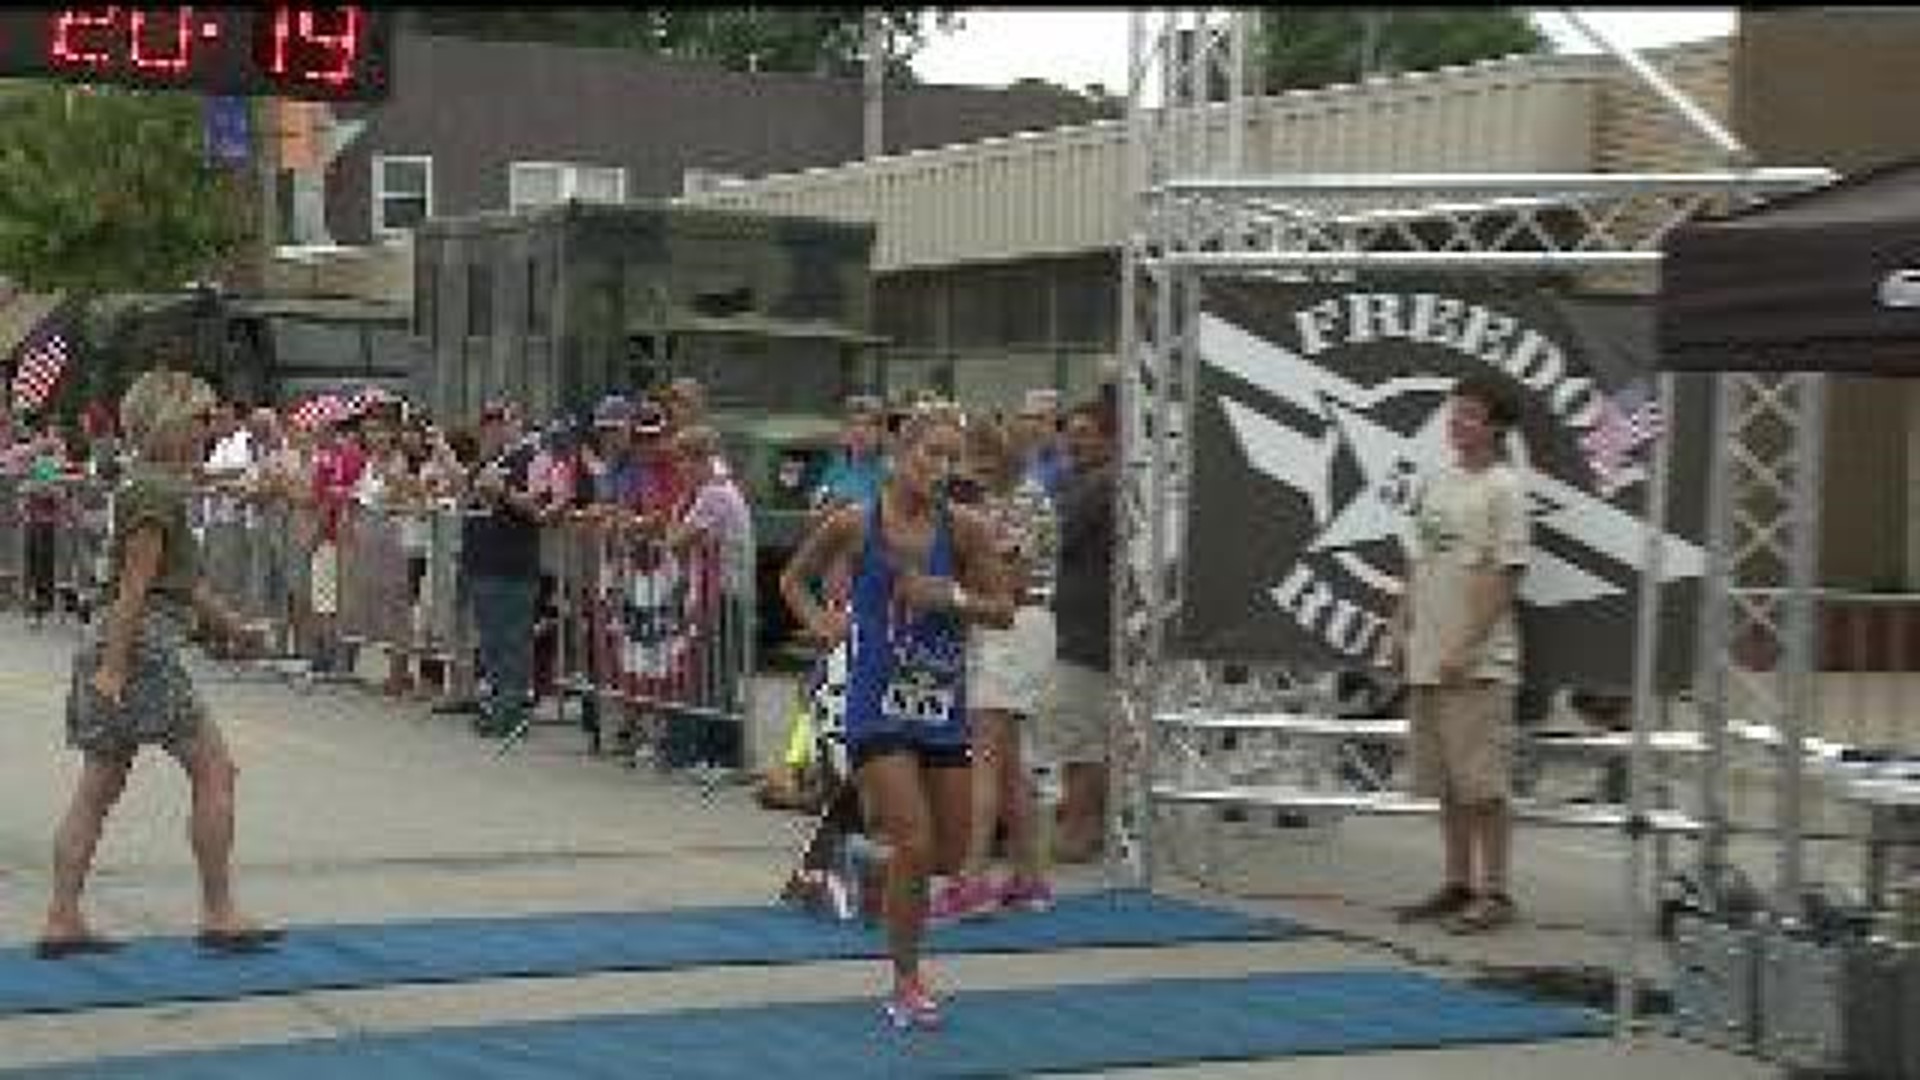 Freedom Run awarded "Gift of Giving"